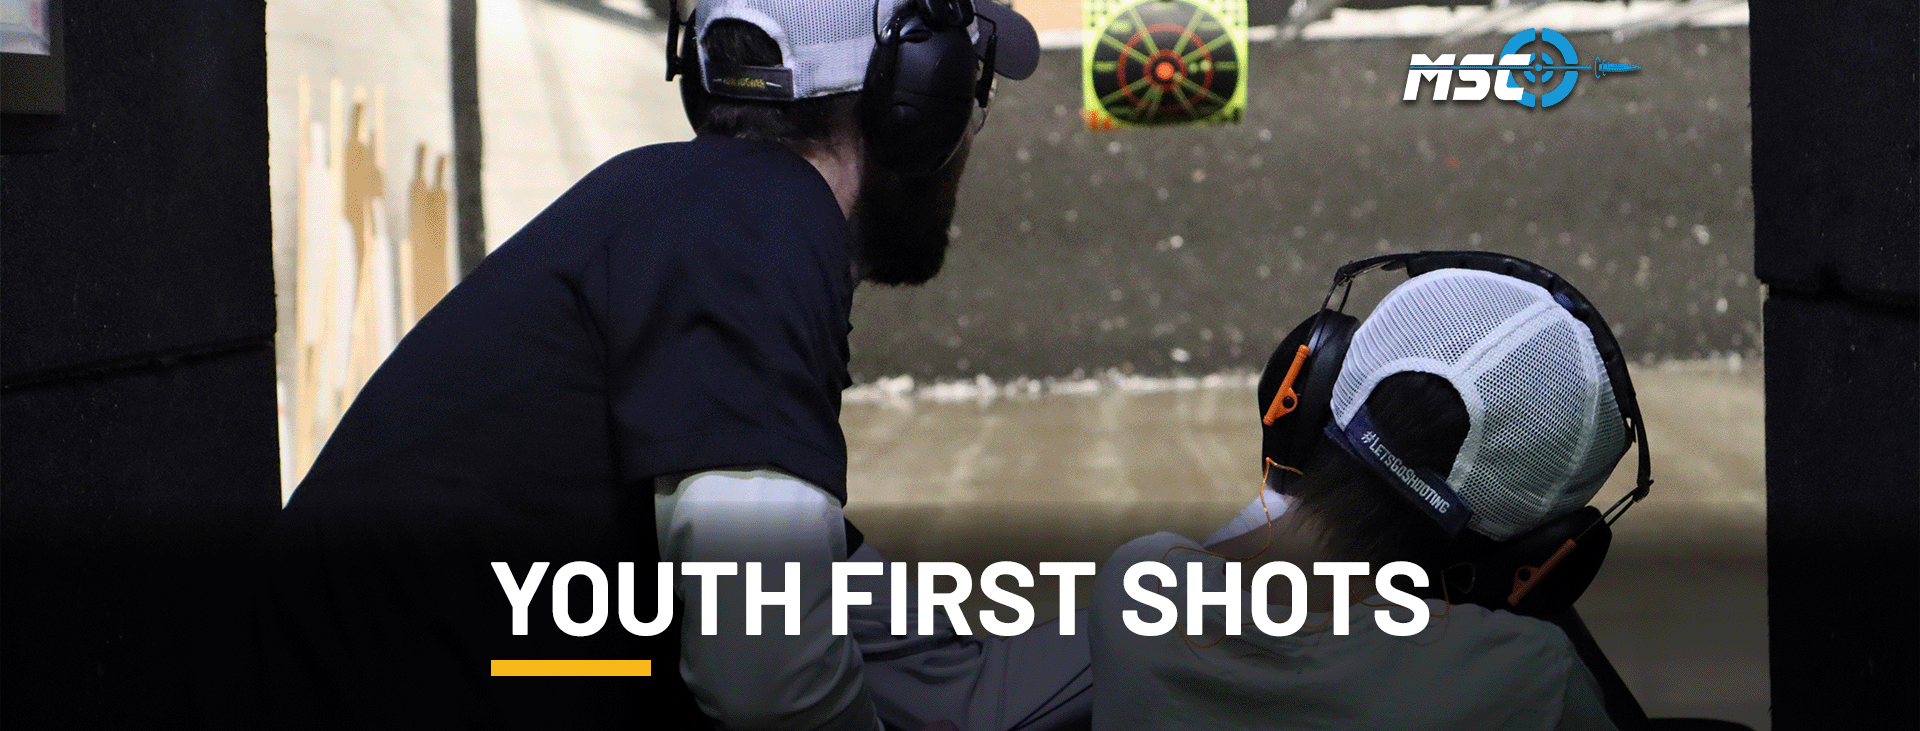 Youth First Shots